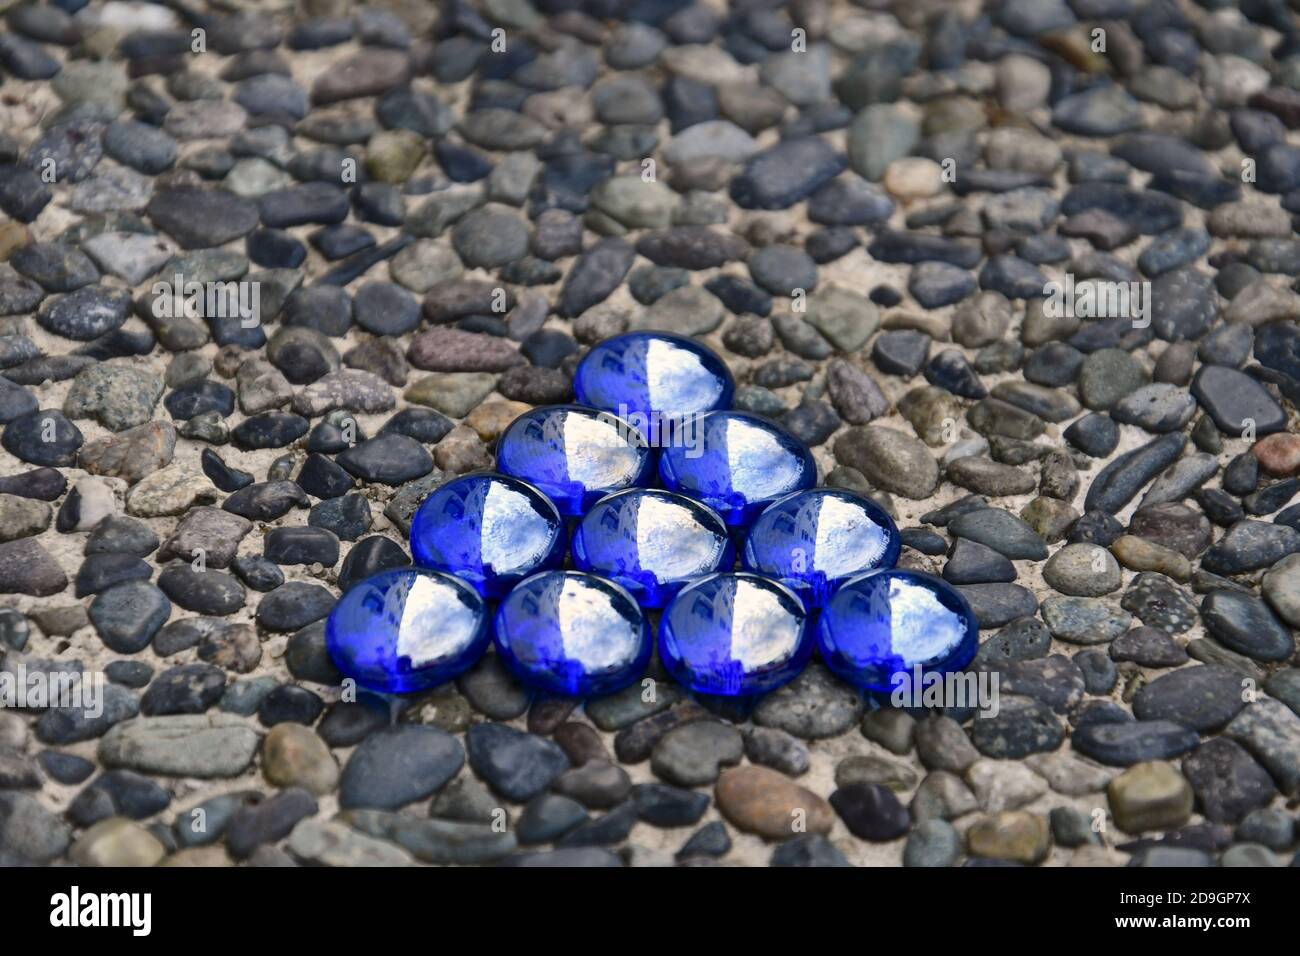 Triangle of iridescent blue glass beads isolated on a pebbledashed stone background. Stock Photo